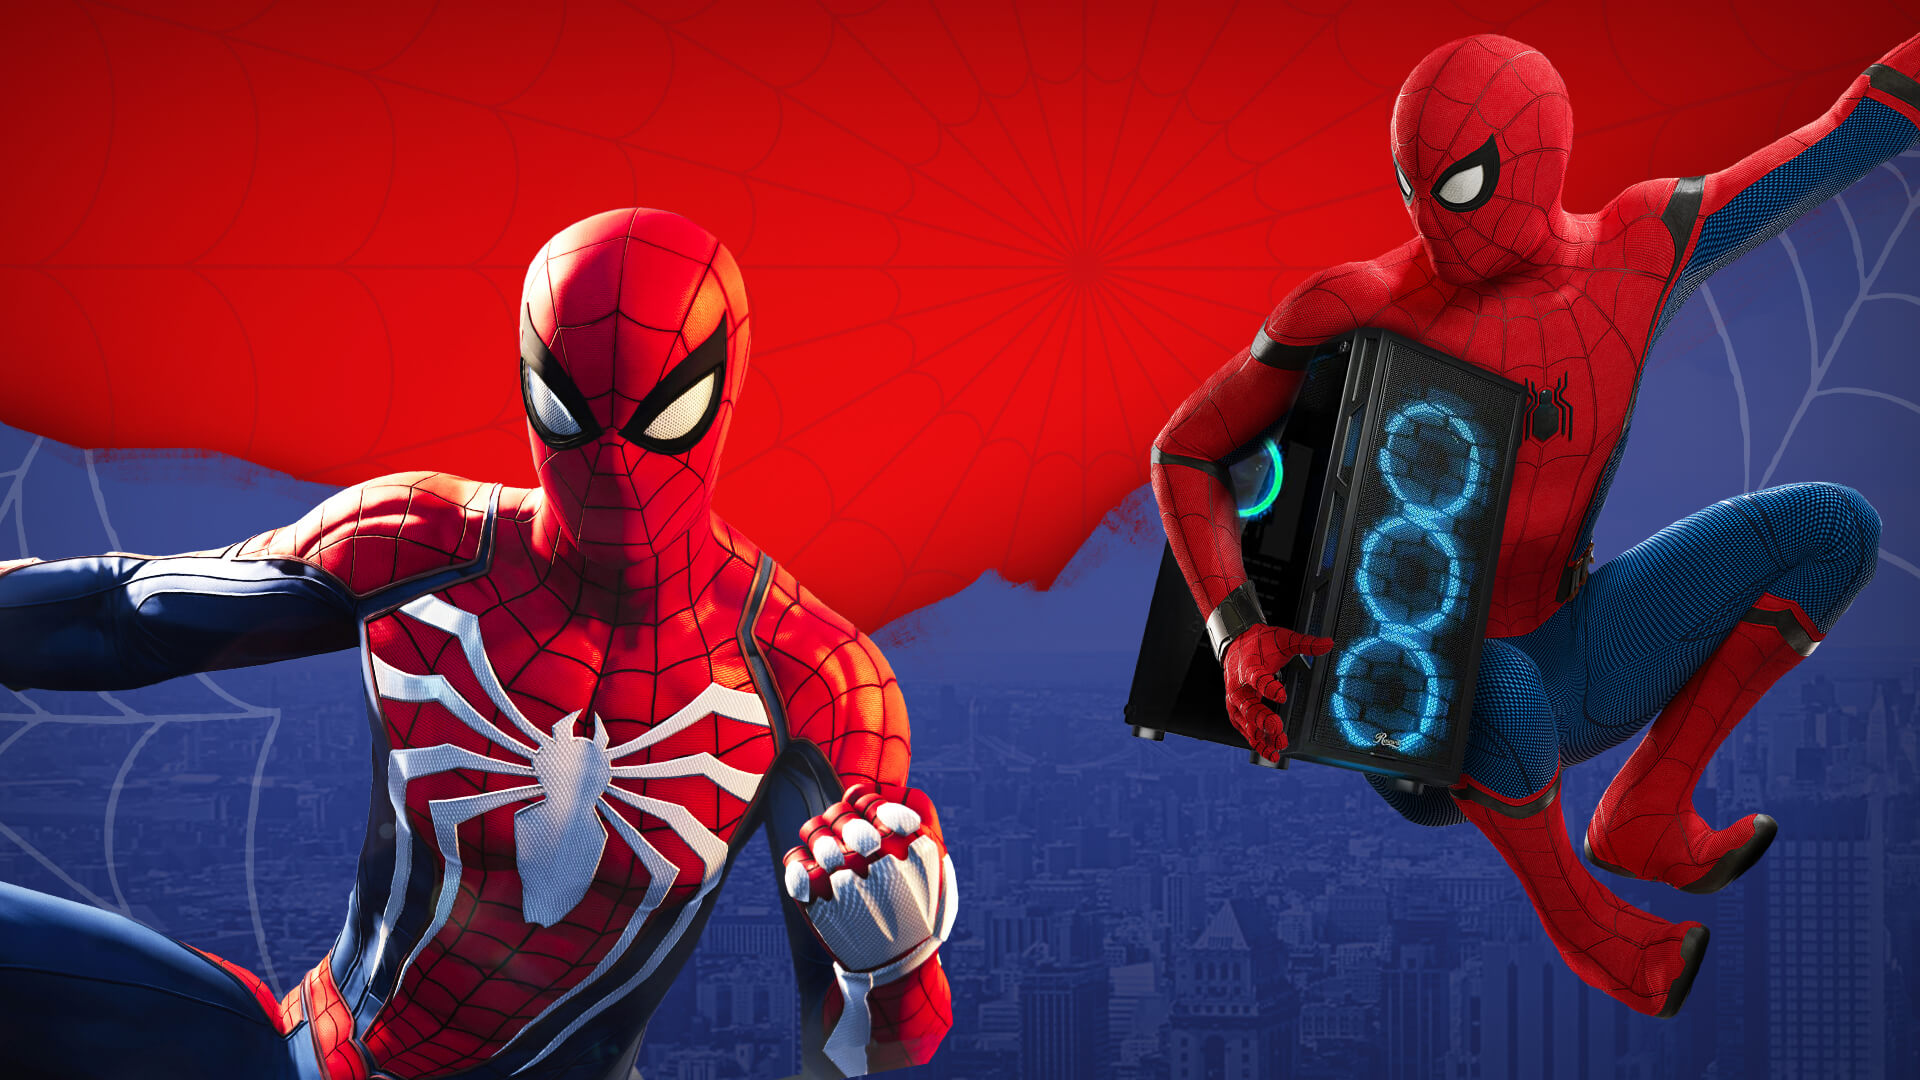 Spider-Man PC: Will Spider-Man PS4 come to PC?